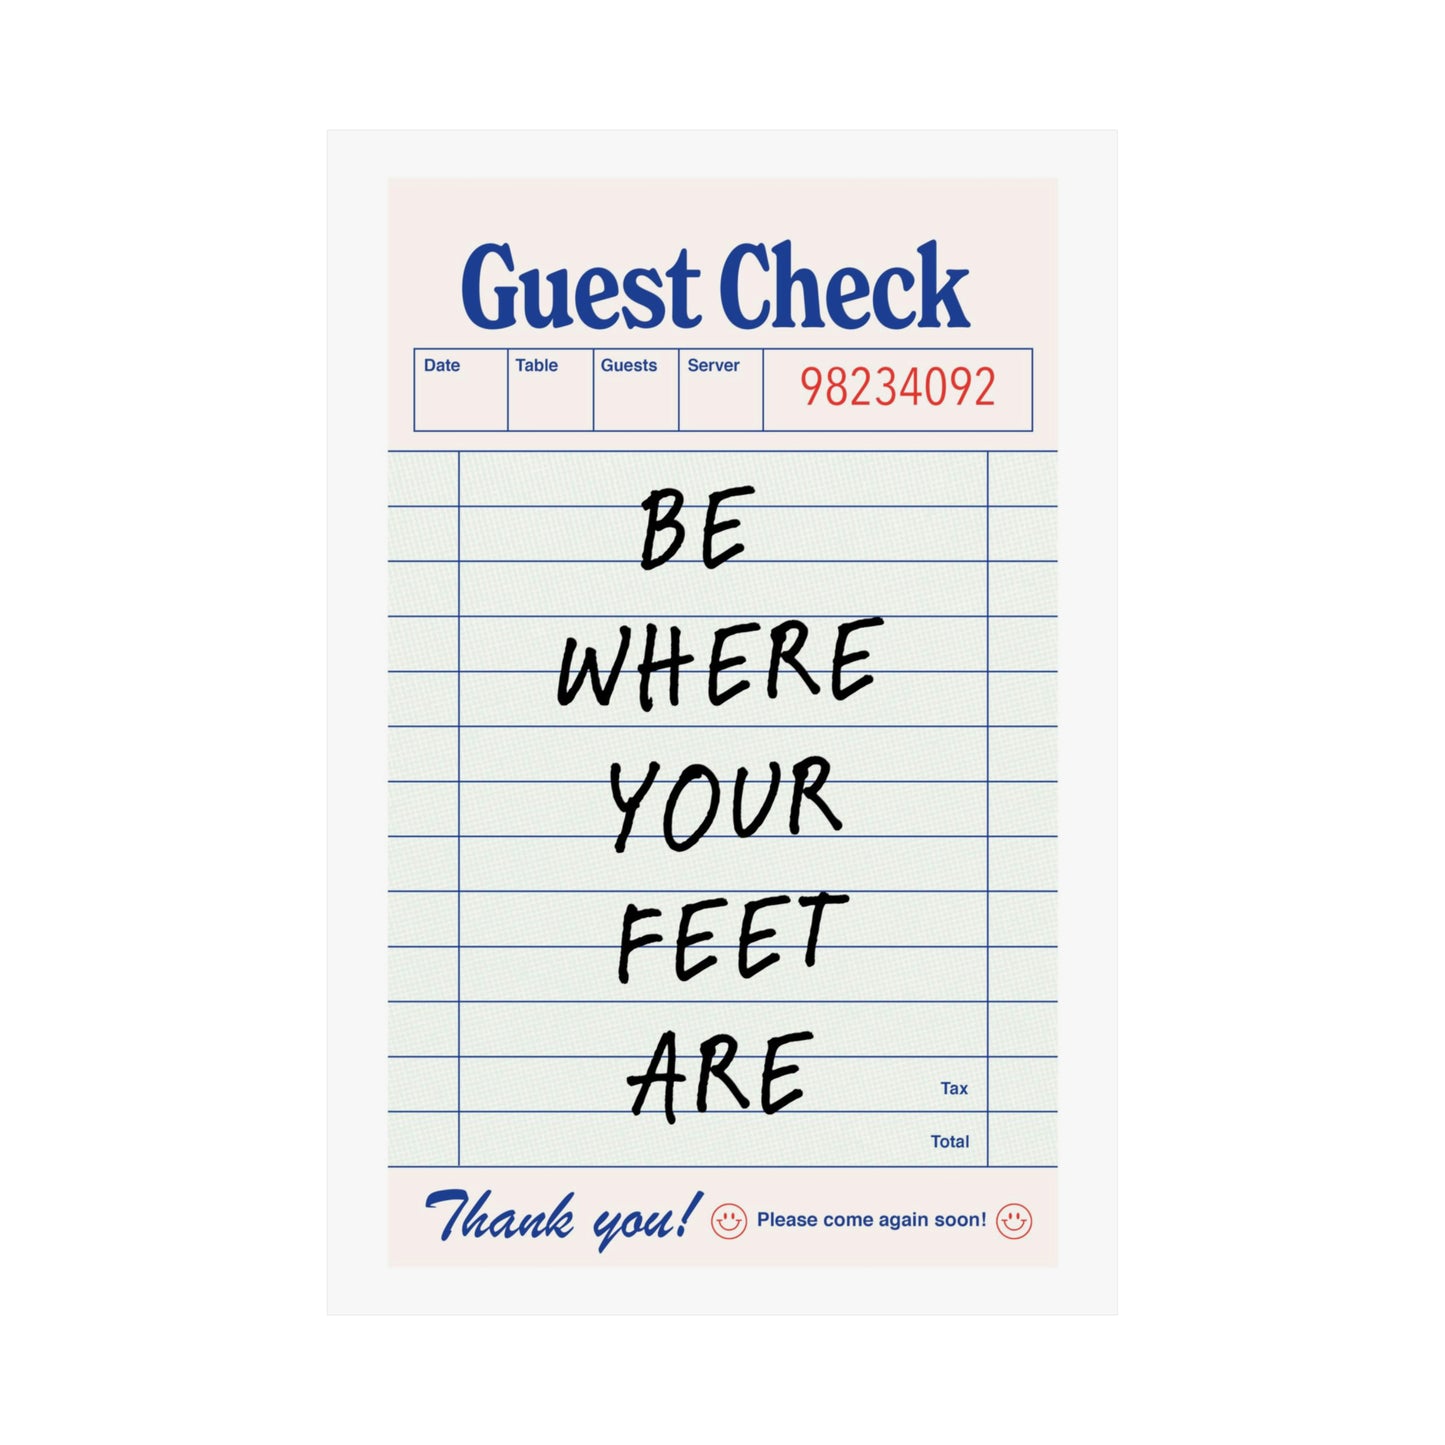 Be Where Your Feet Are - Guest Check Poster